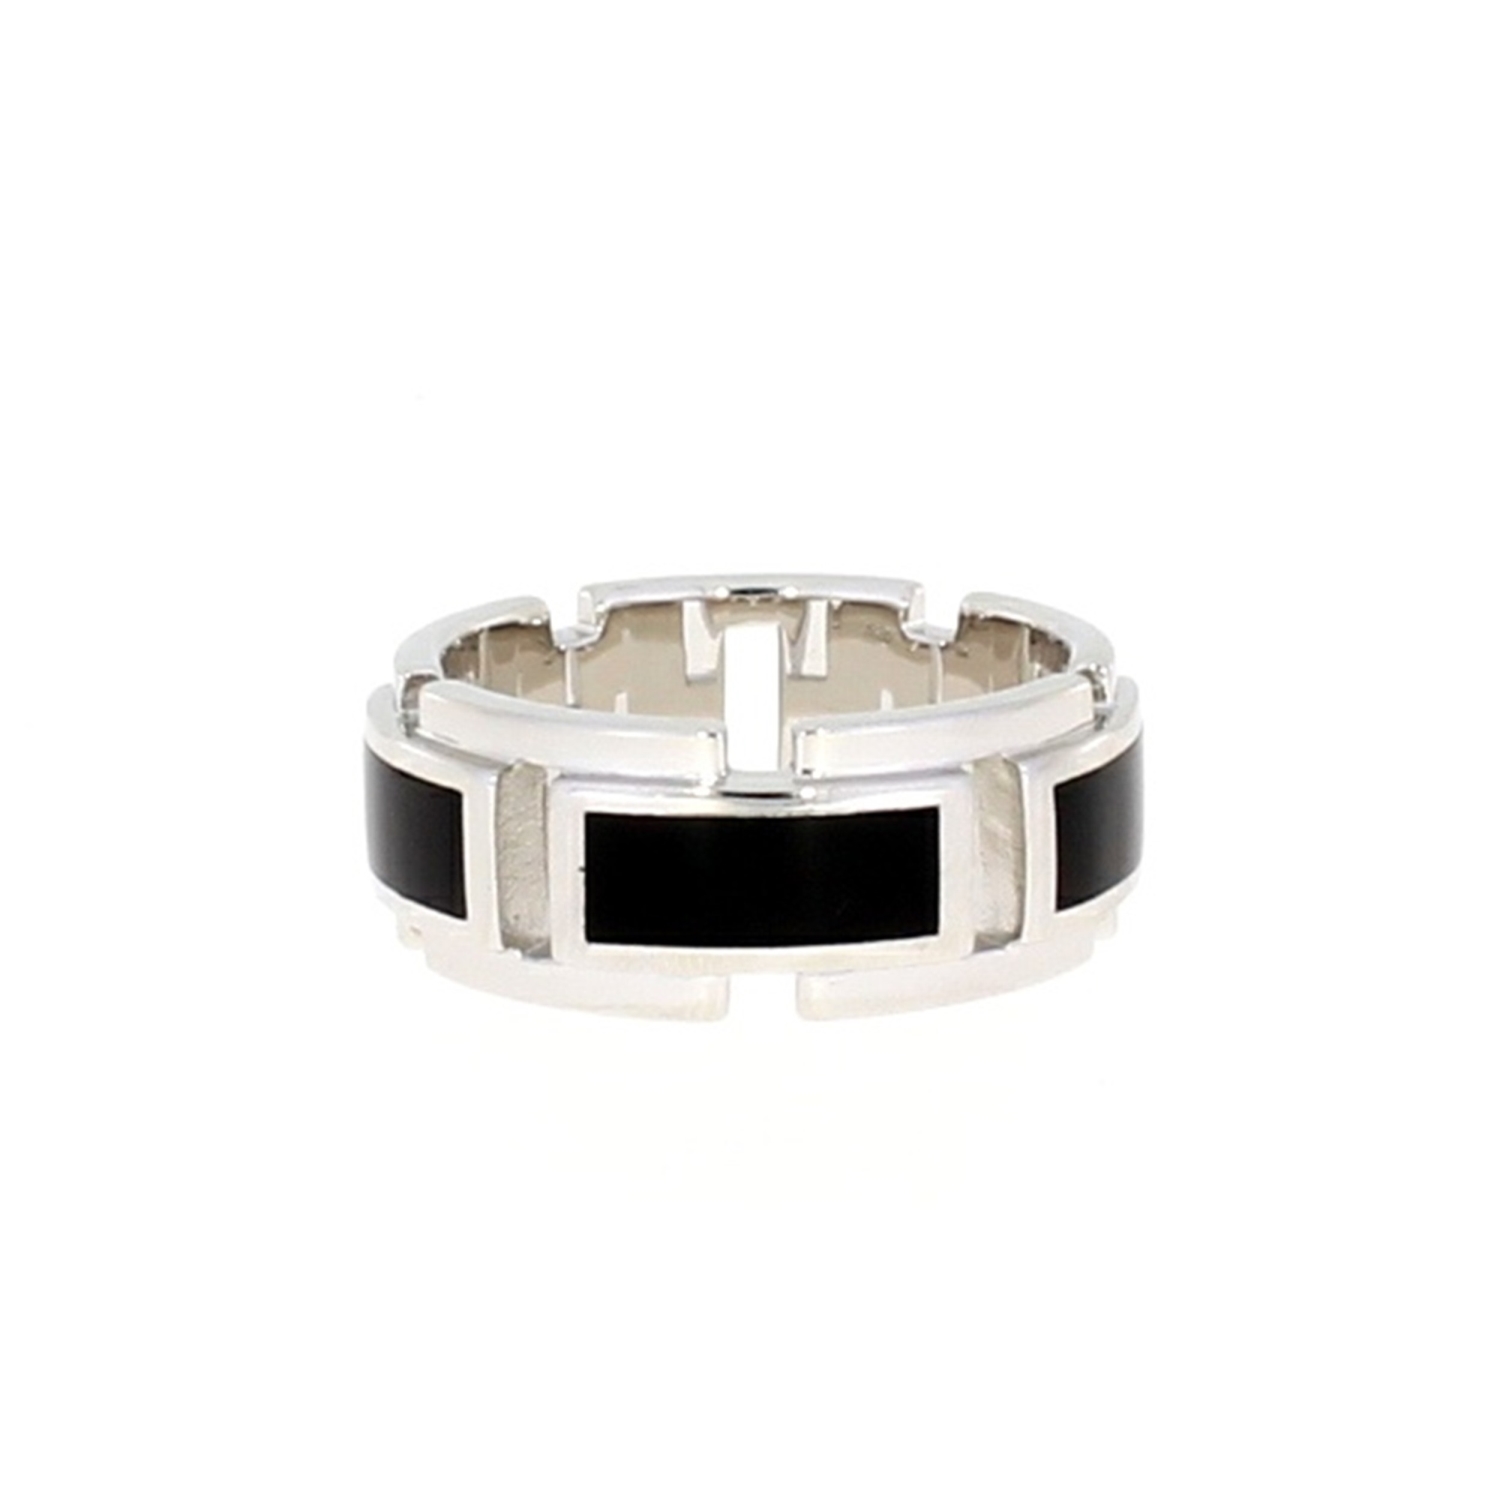 Diamond Princess Beautiful Onyx 6mm Ring In 925 Sterling Silver